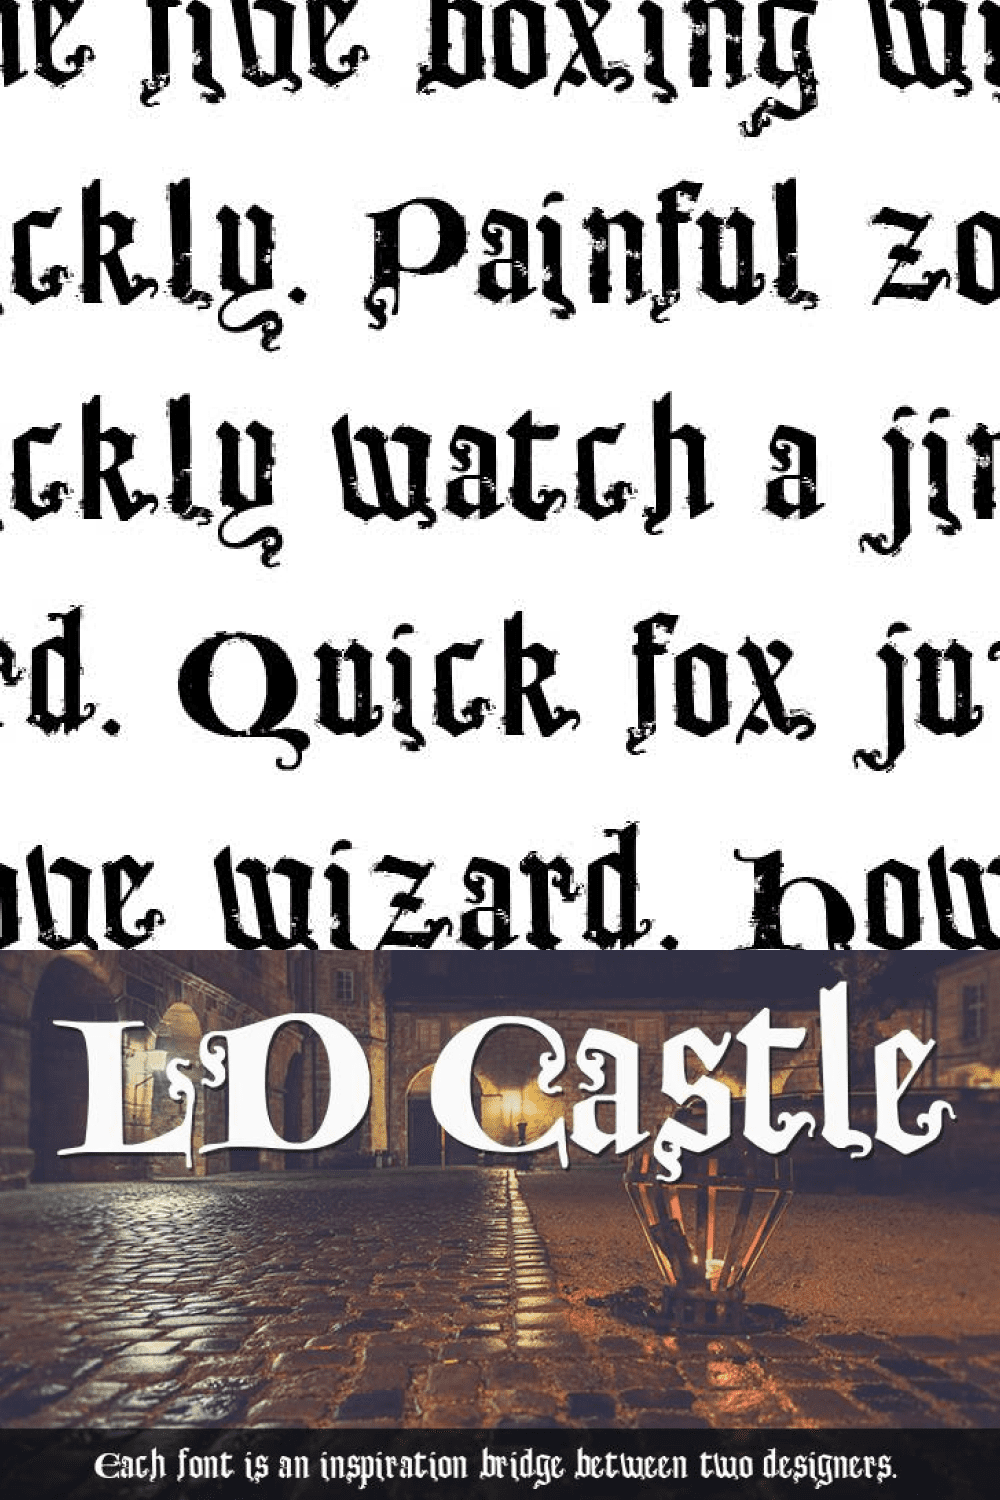 This is an antique style font with a fairytale feel.